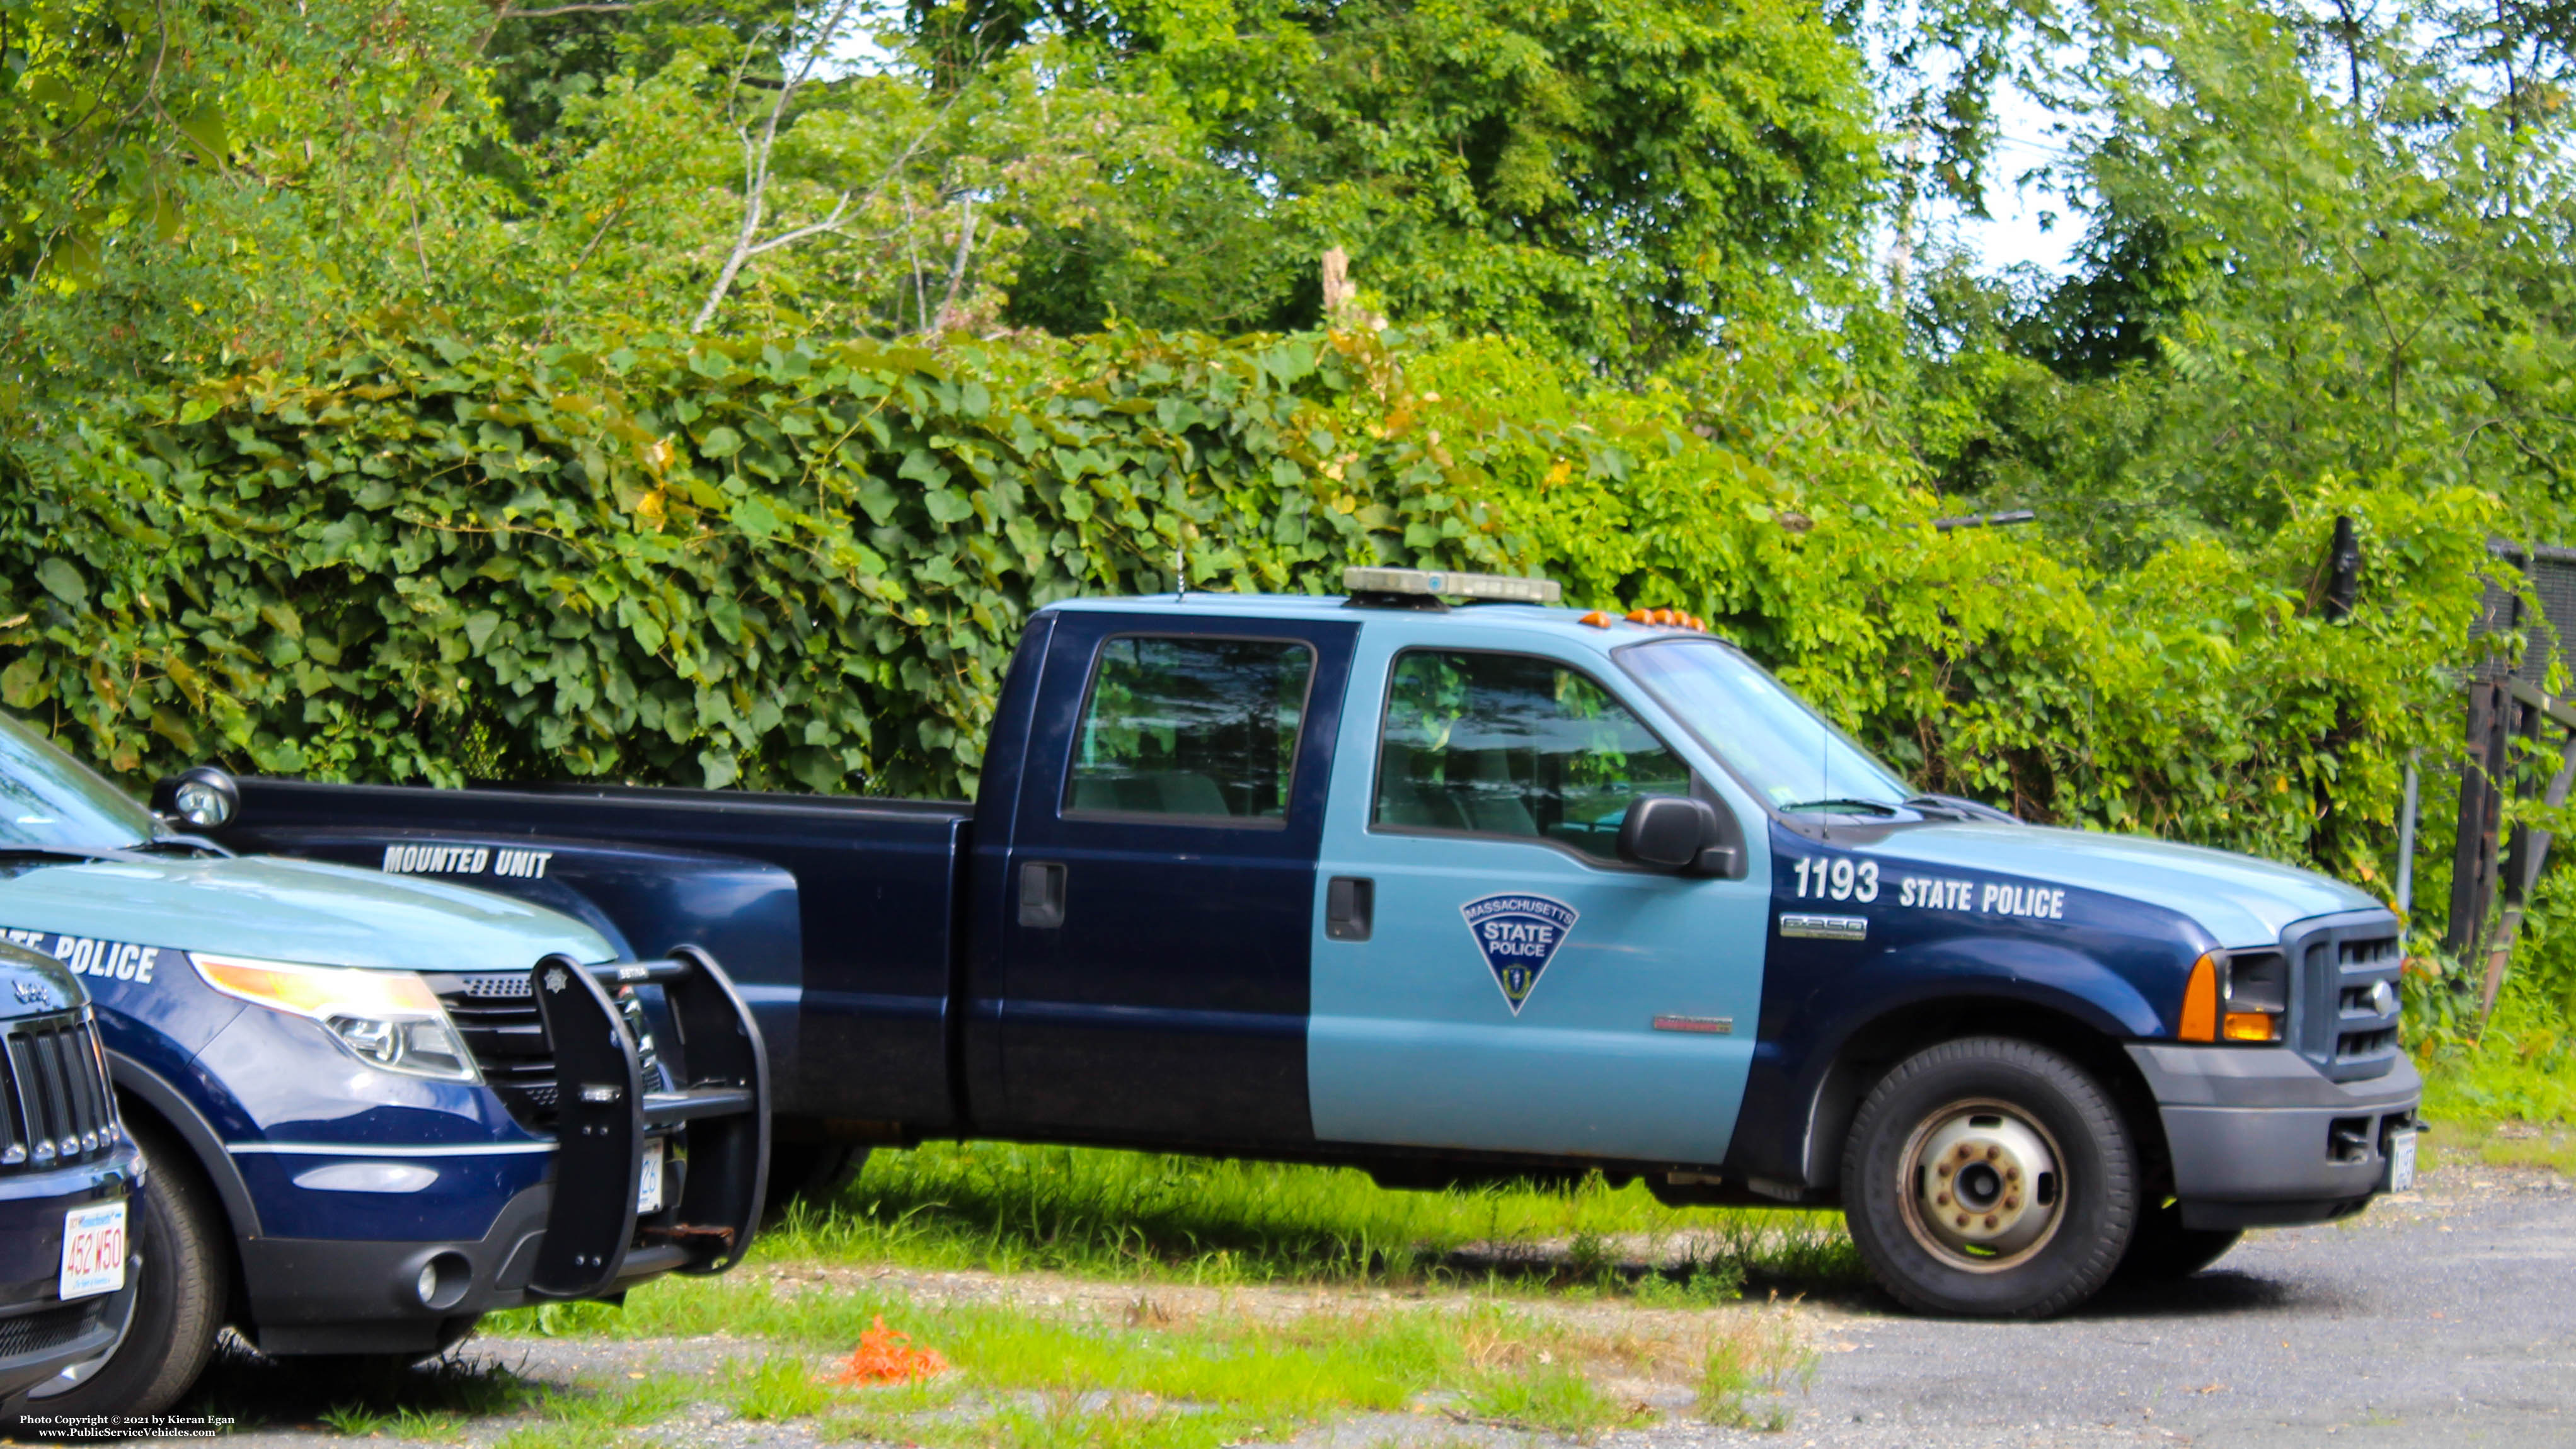 A photo  of Massachusetts State Police
            Cruiser 1193, a 2006 Ford F-350 Crew Cab             taken by Kieran Egan